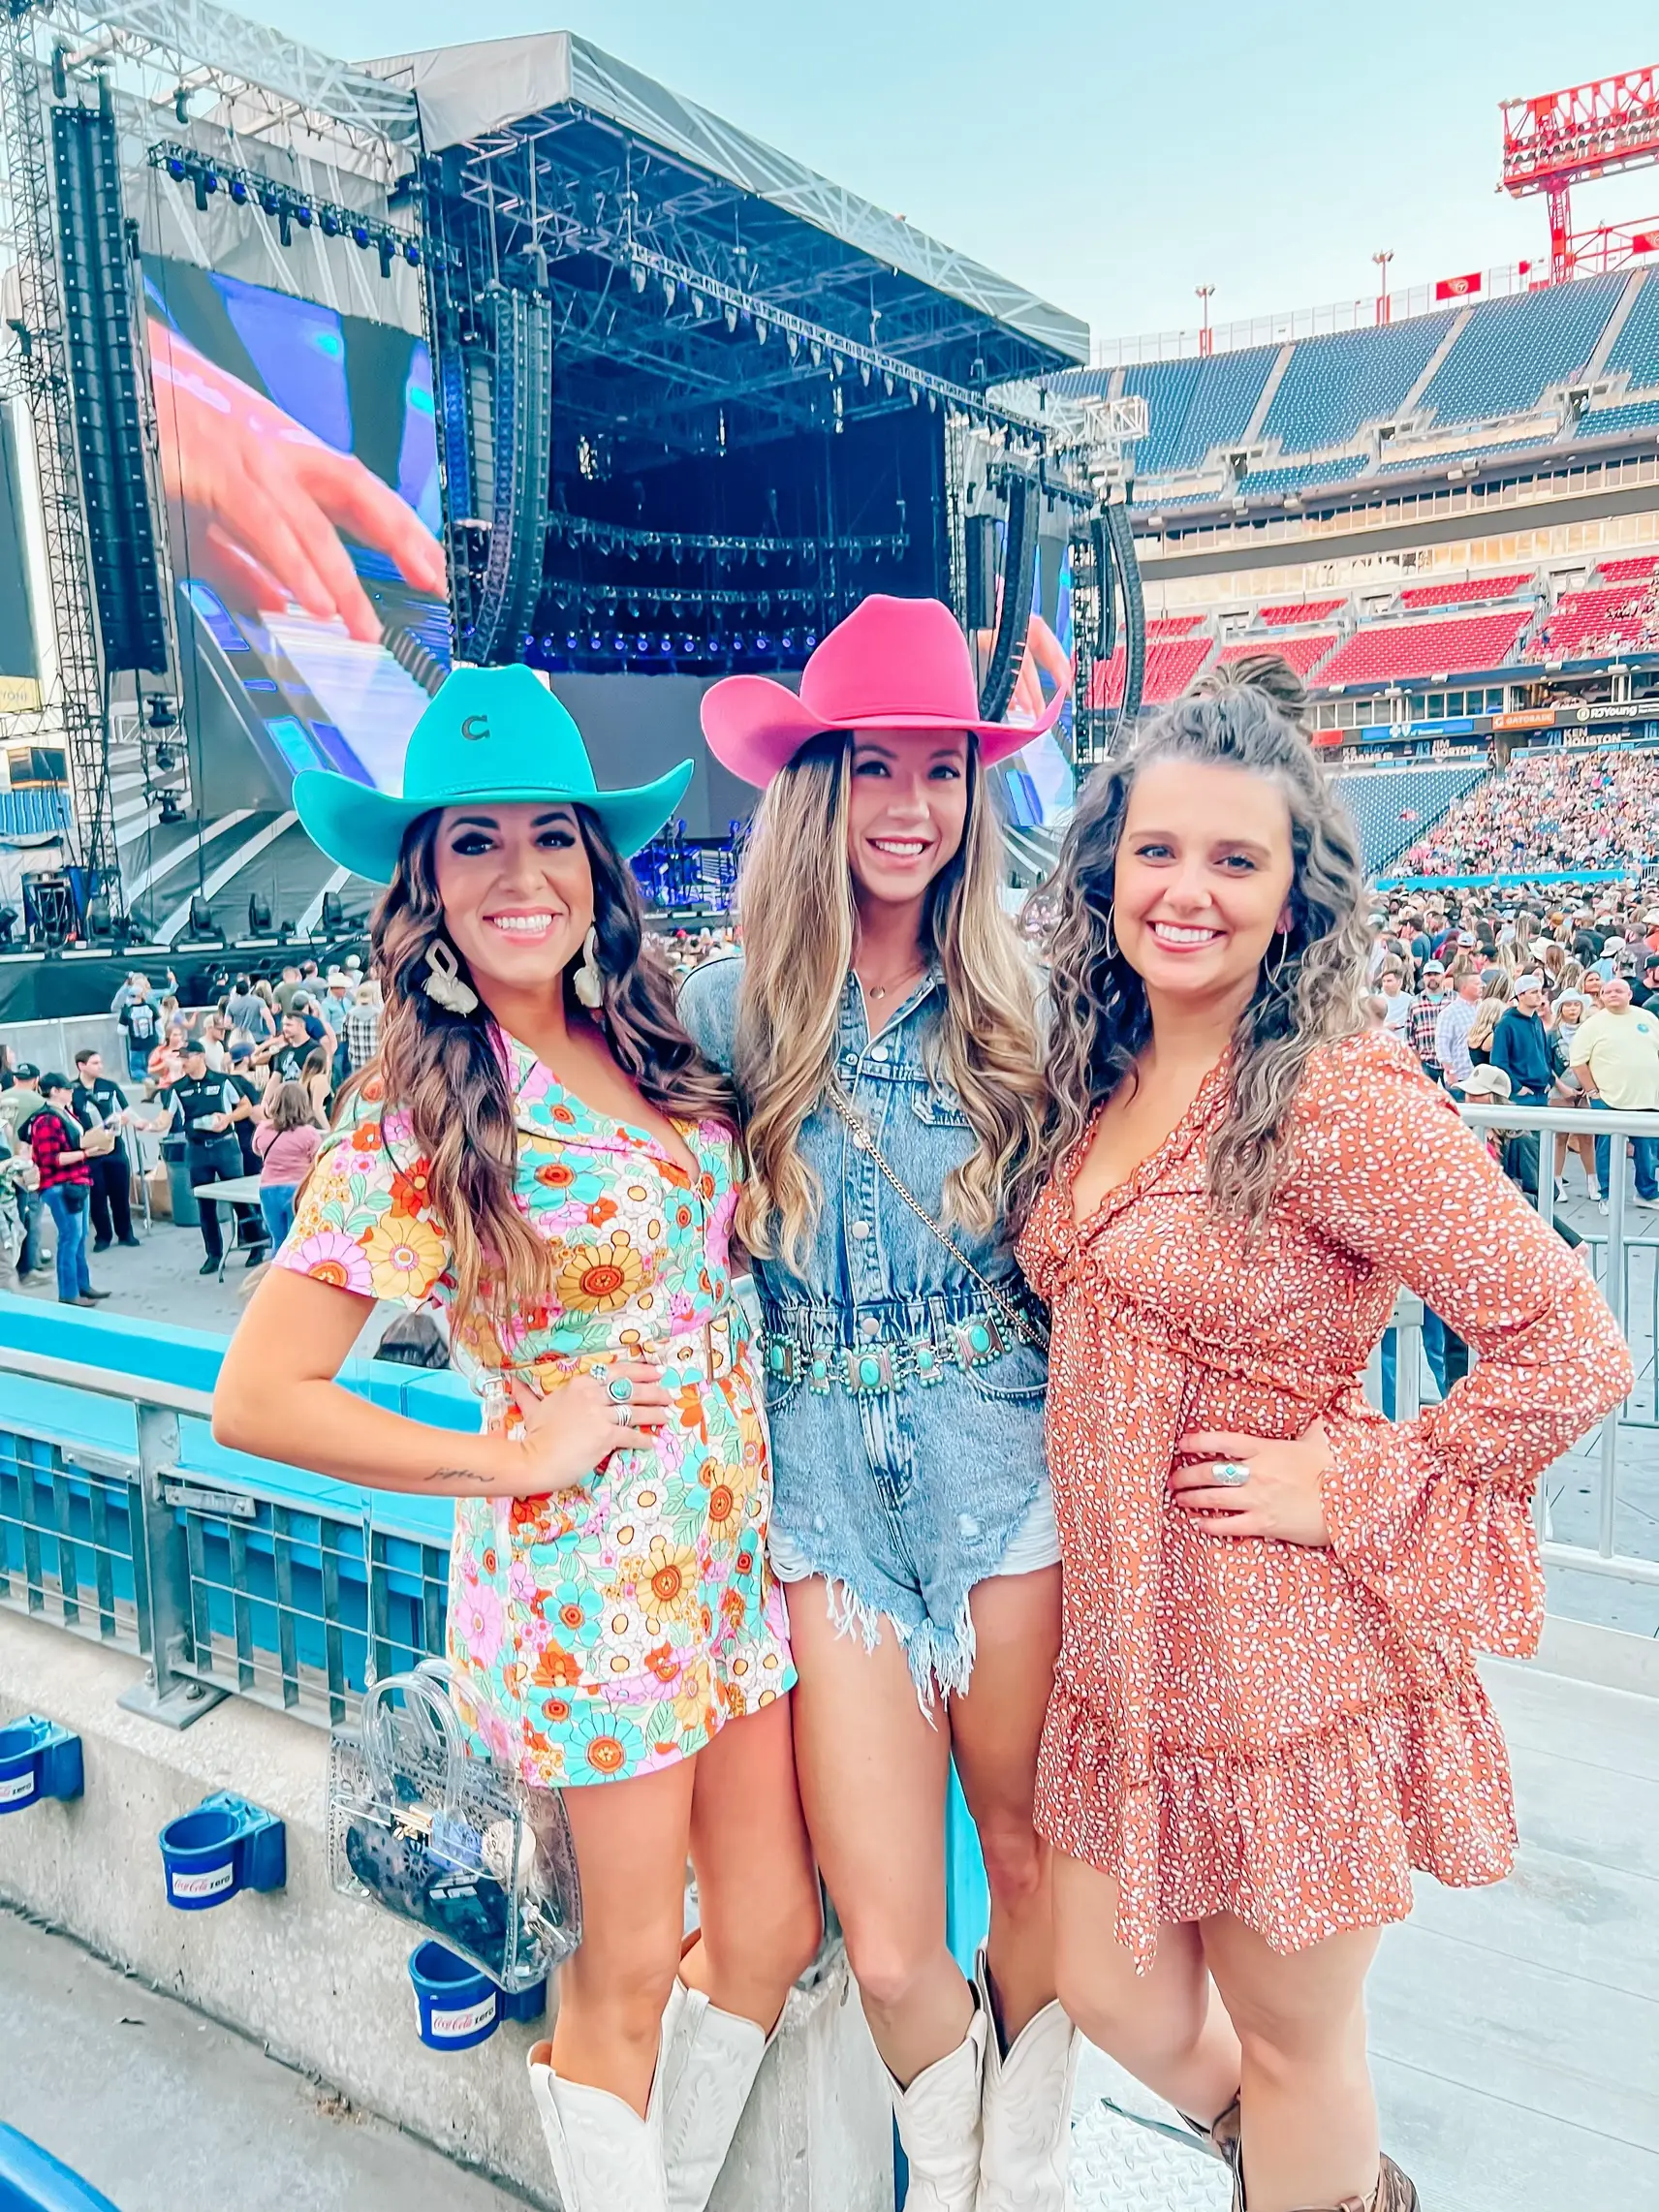 dresses for country concerts